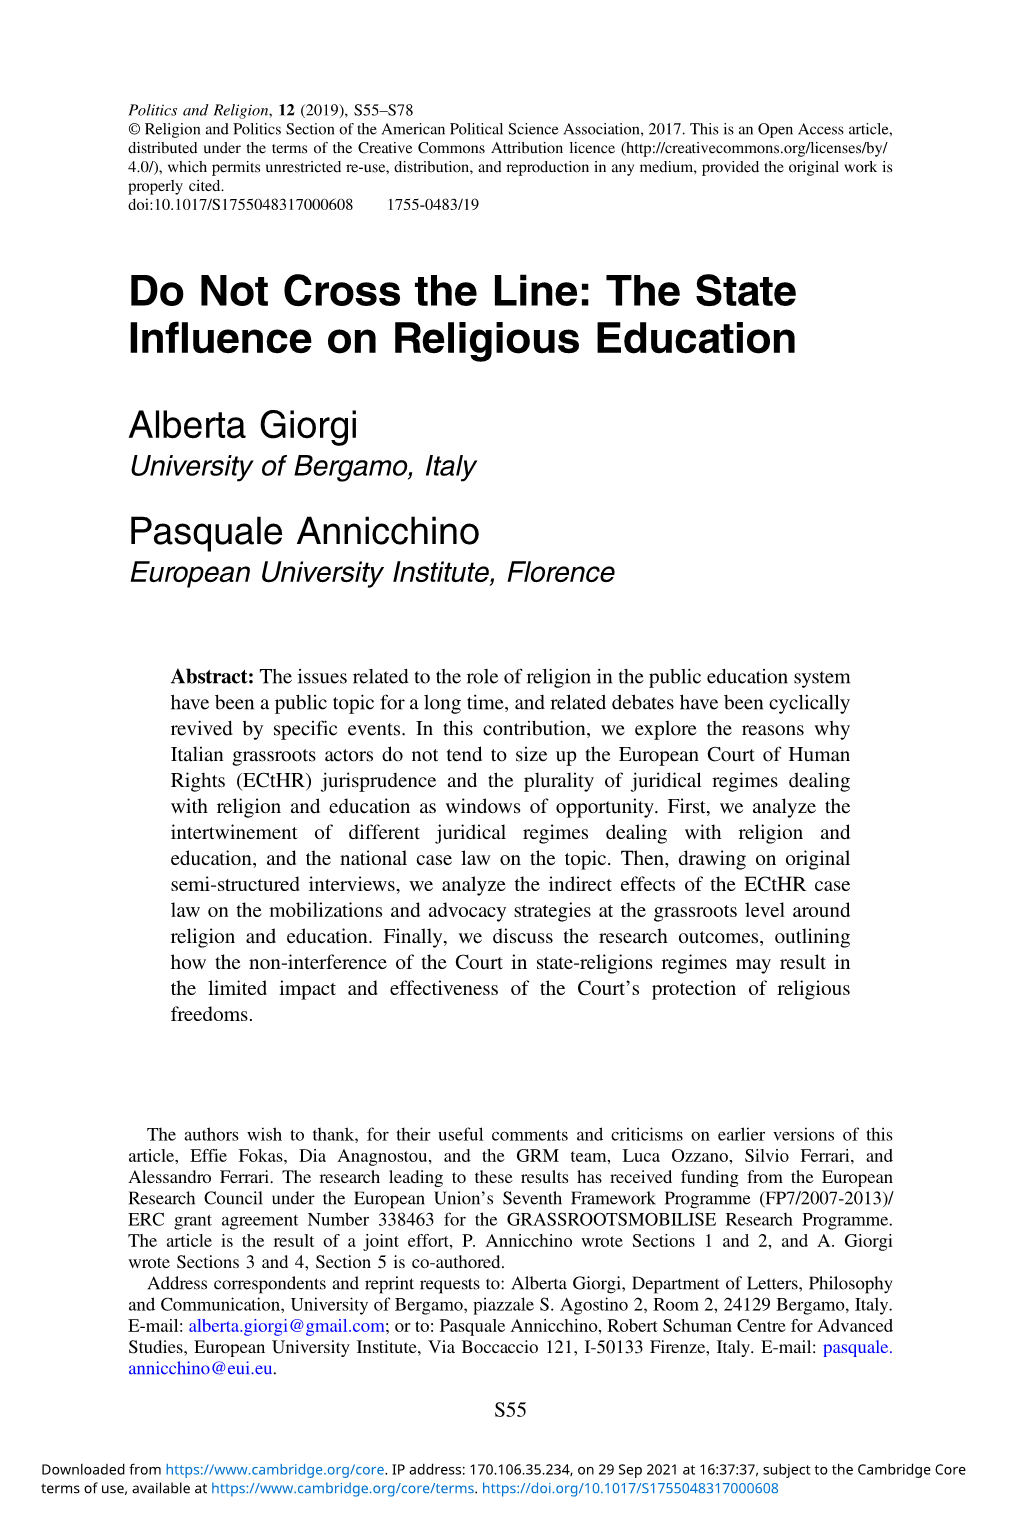 Do Not Cross the Line: the State Influence on Religious Education